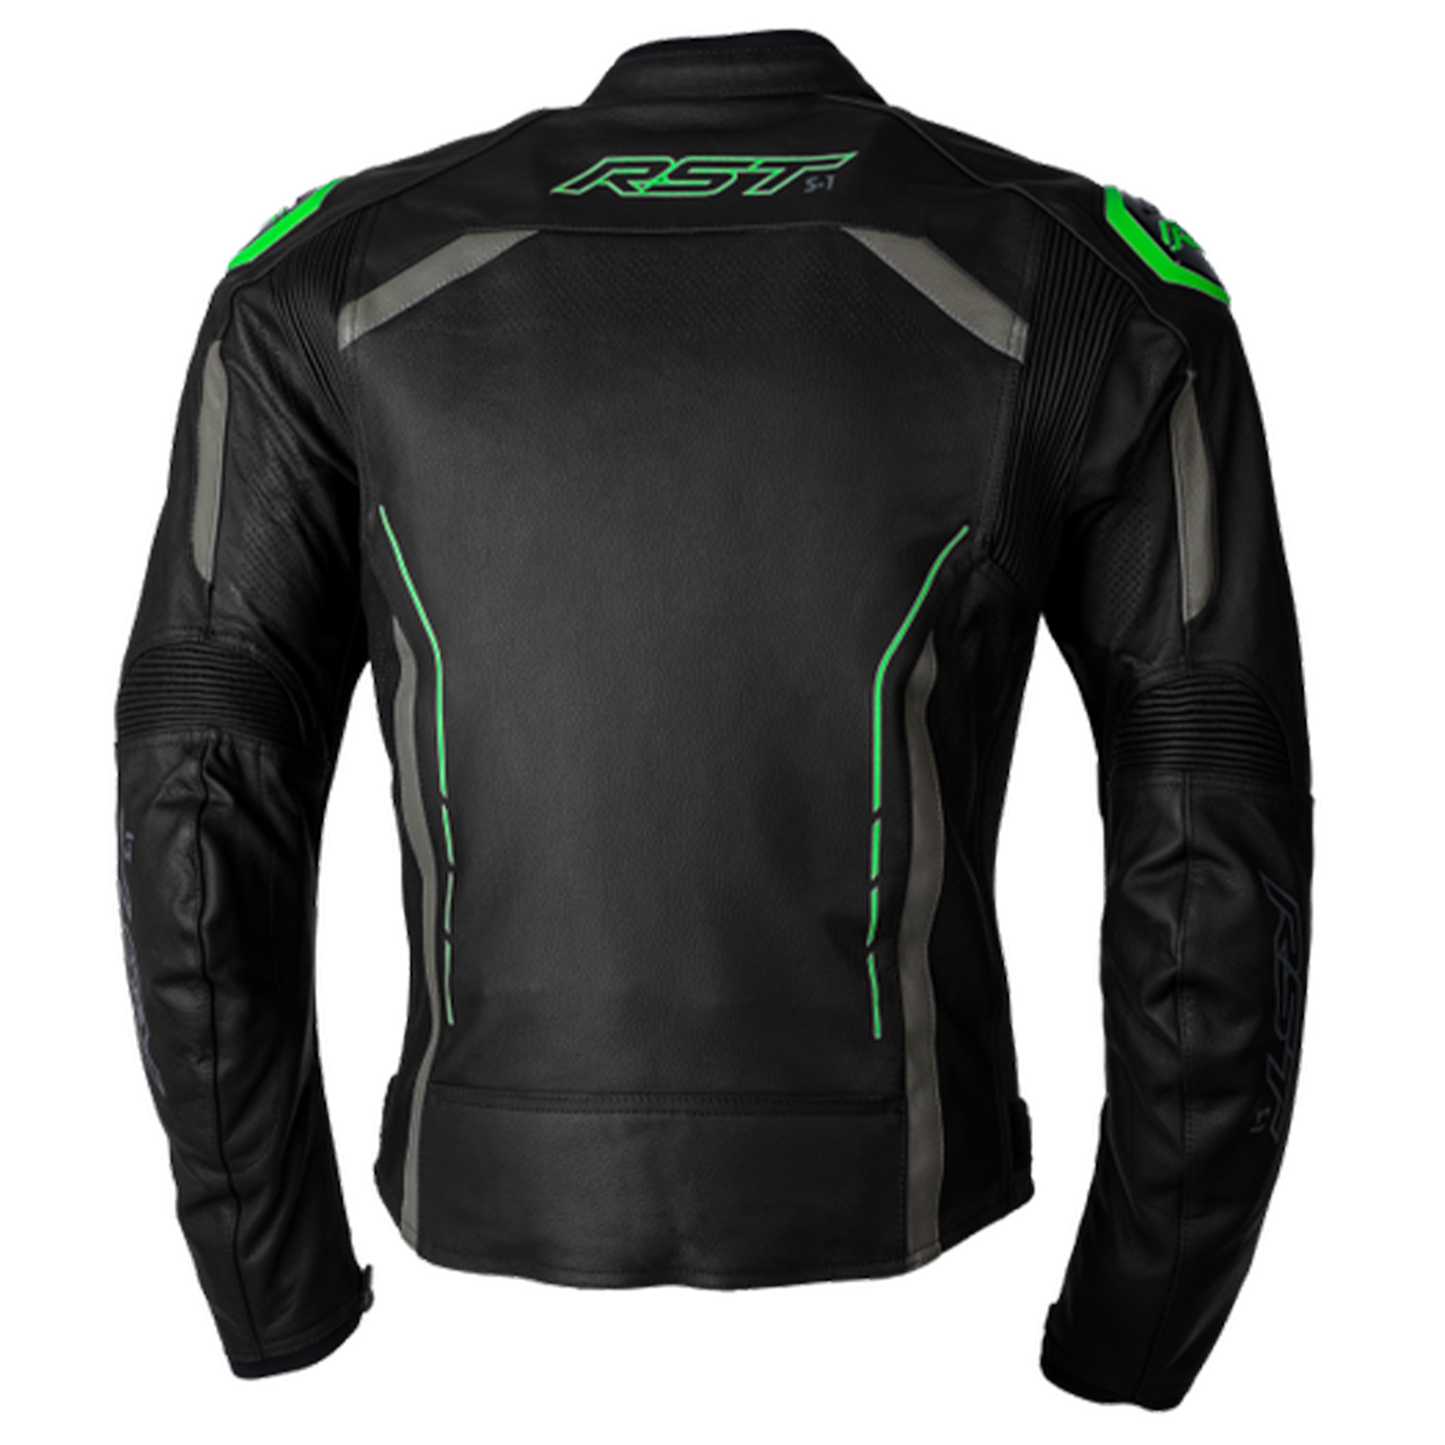 RST S1 (CE) Men's Leather Jacket - Black/Grey/Neon Green (2977)